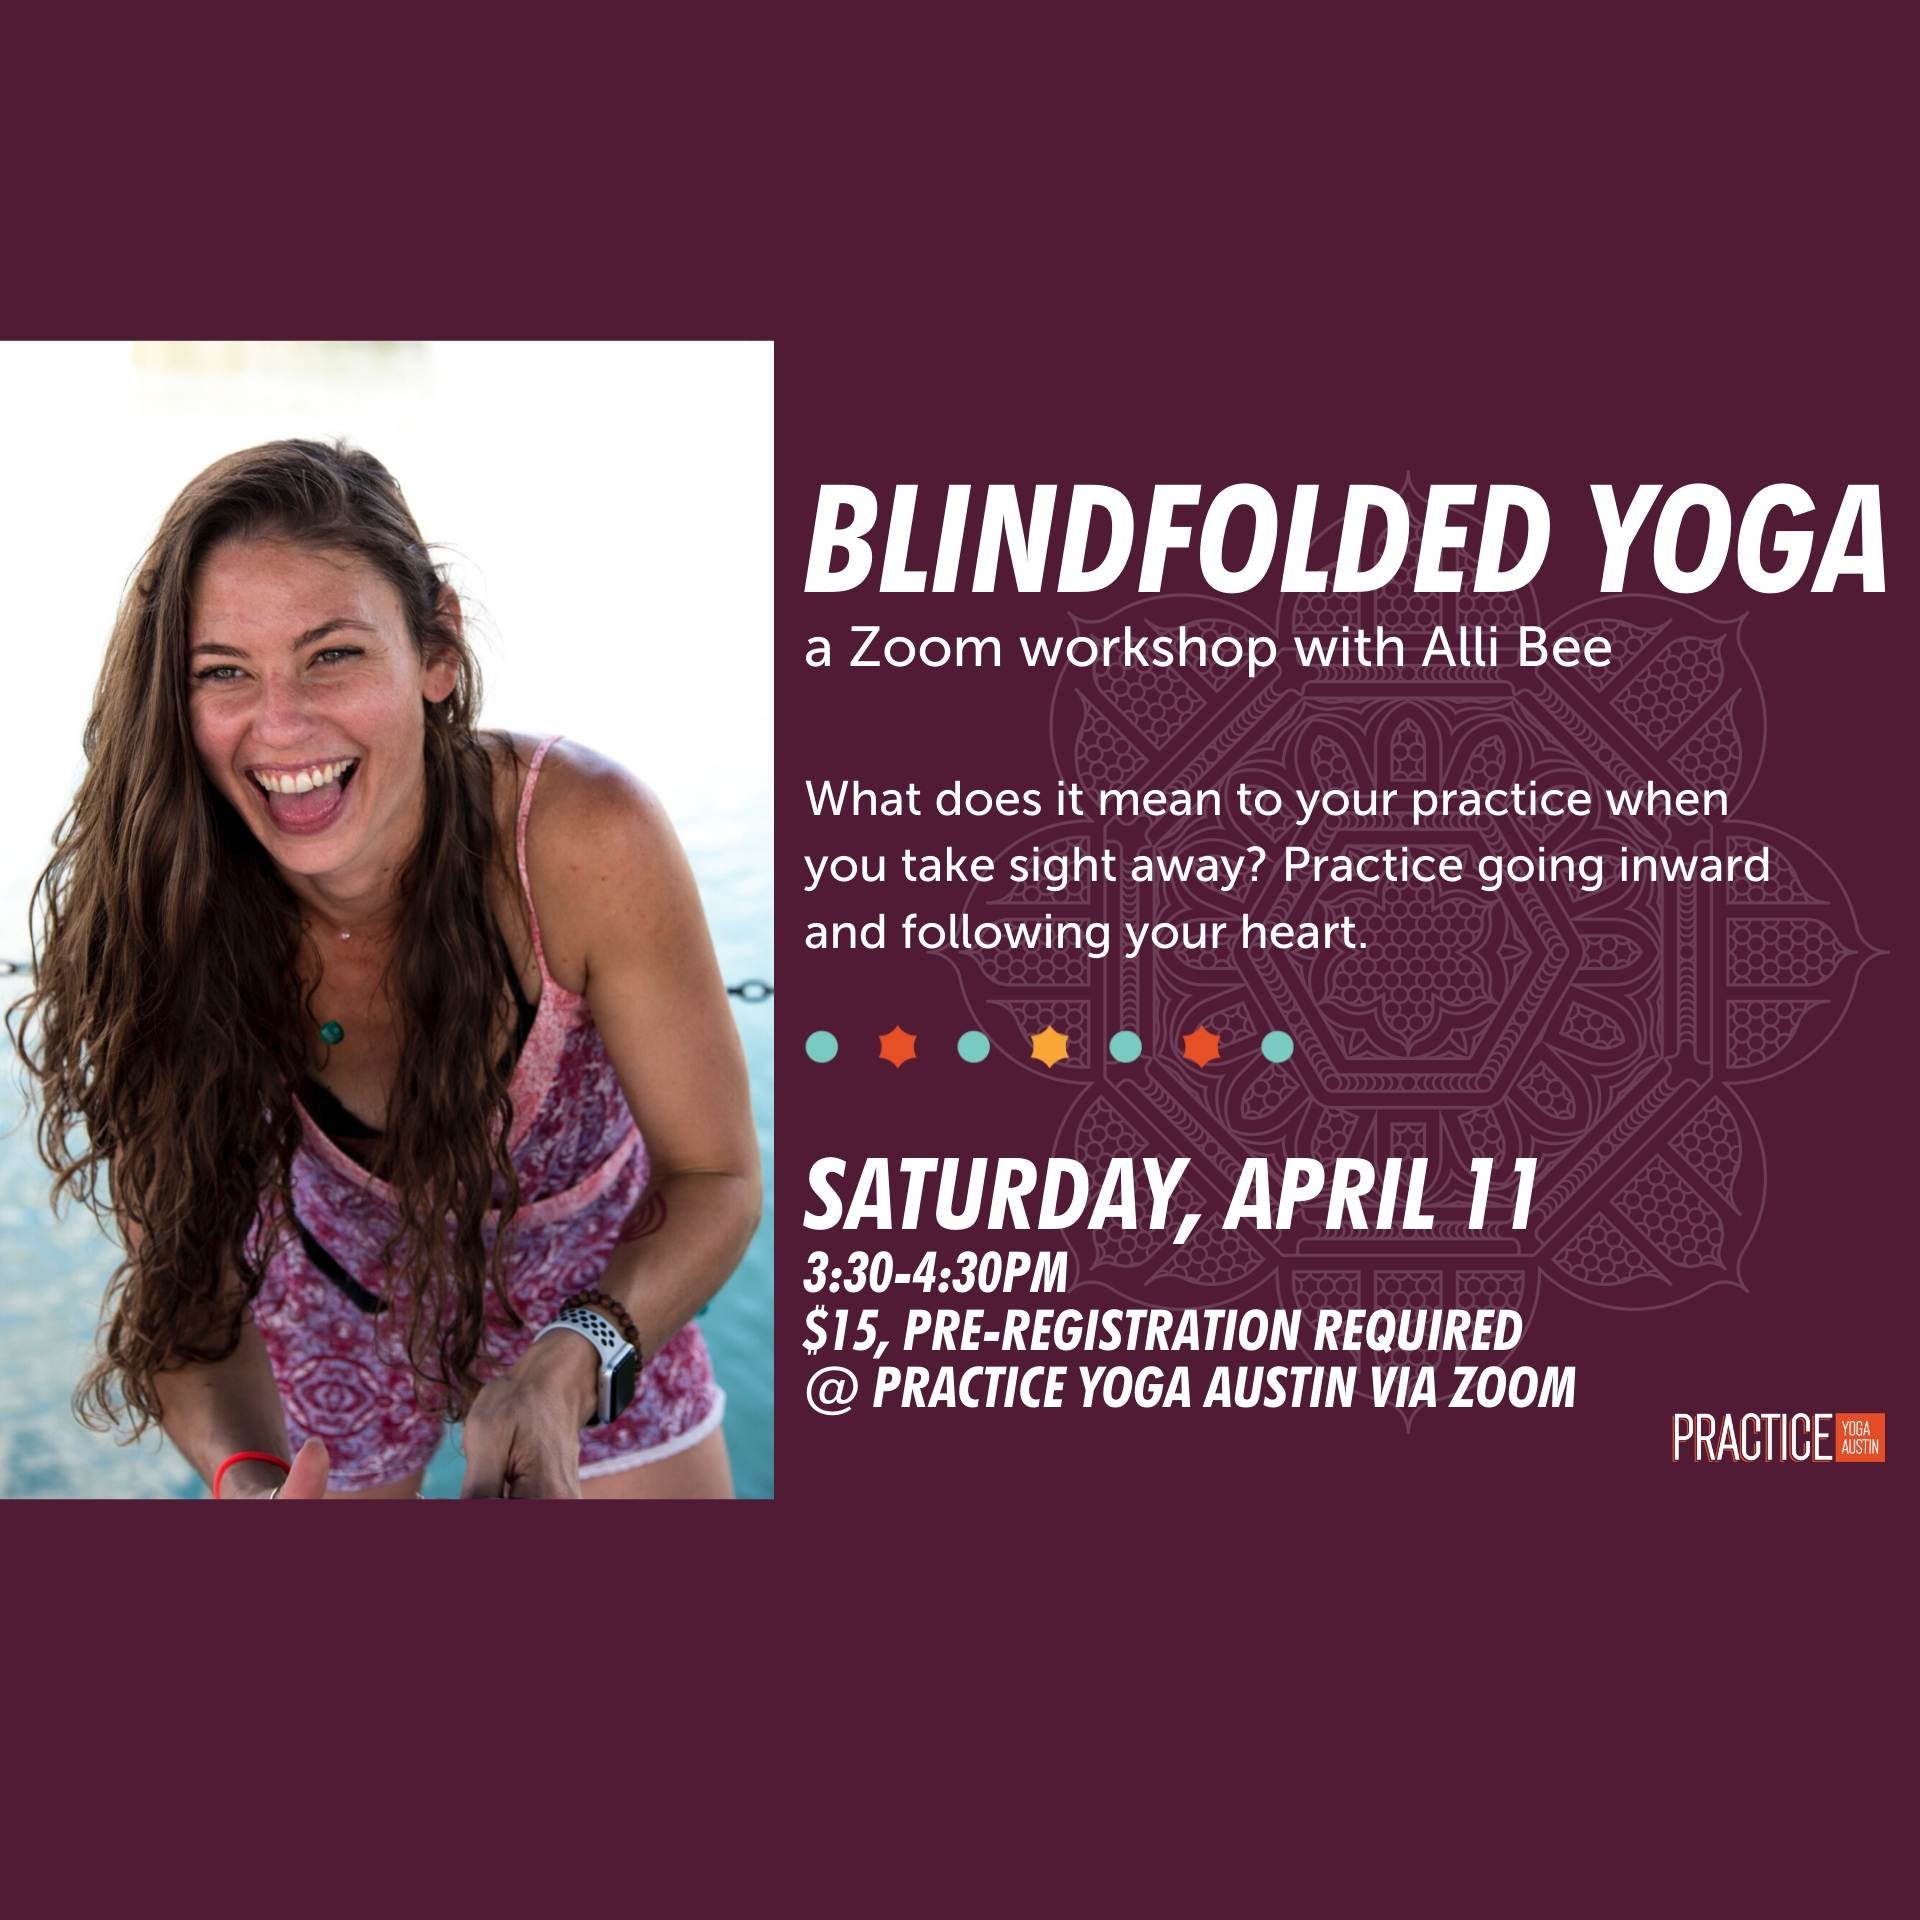 What Is Blindfolded Yoga?